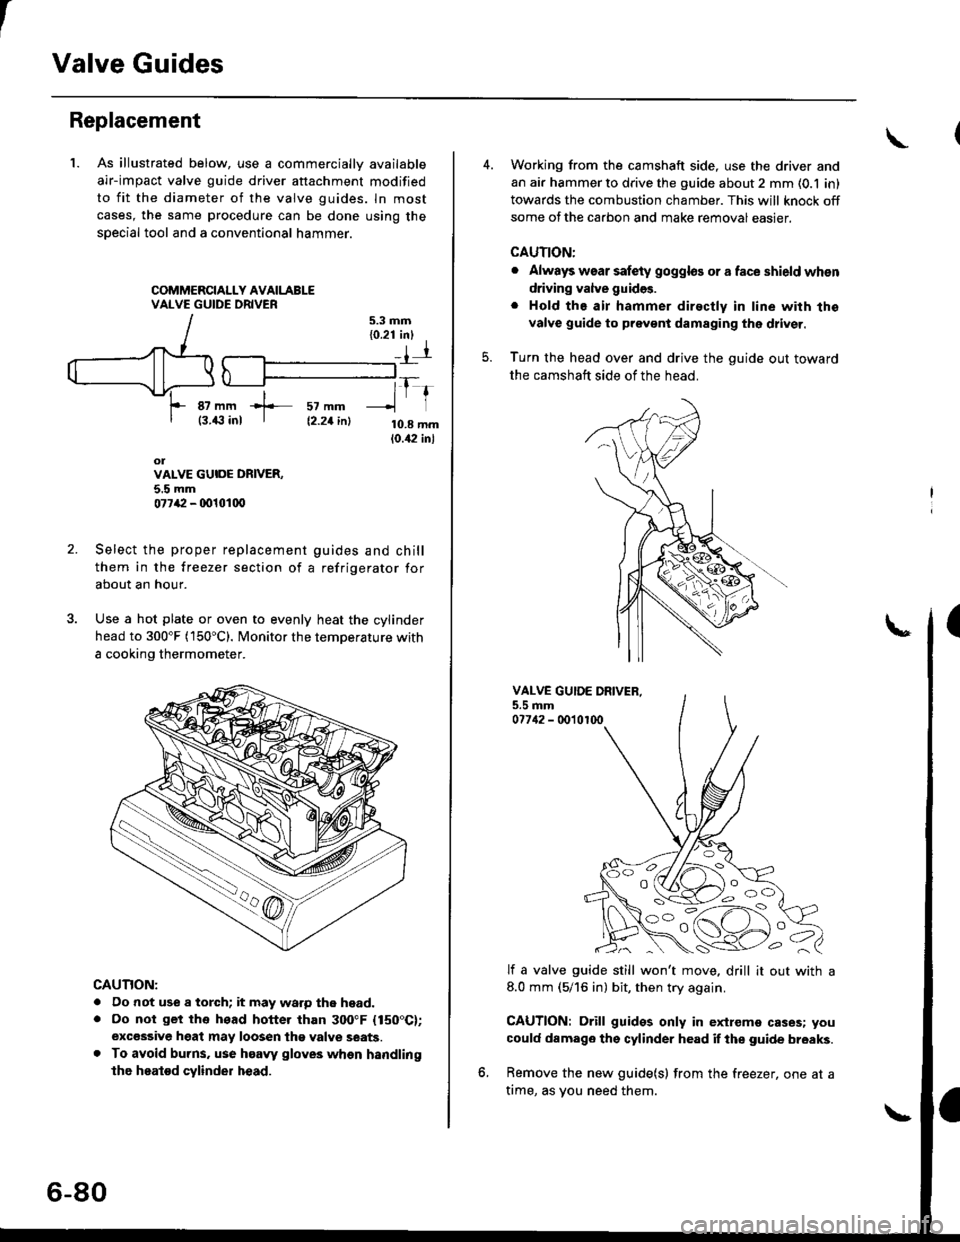 HONDA CIVIC 1999 6.G Workshop Manual t
Valve Guides
Replacement
1. As illustrated below, use a commerciallv available
air-impact valve guide driver attachment modified
to fit the diameter of the valve guides. ln most
cases, the same proc